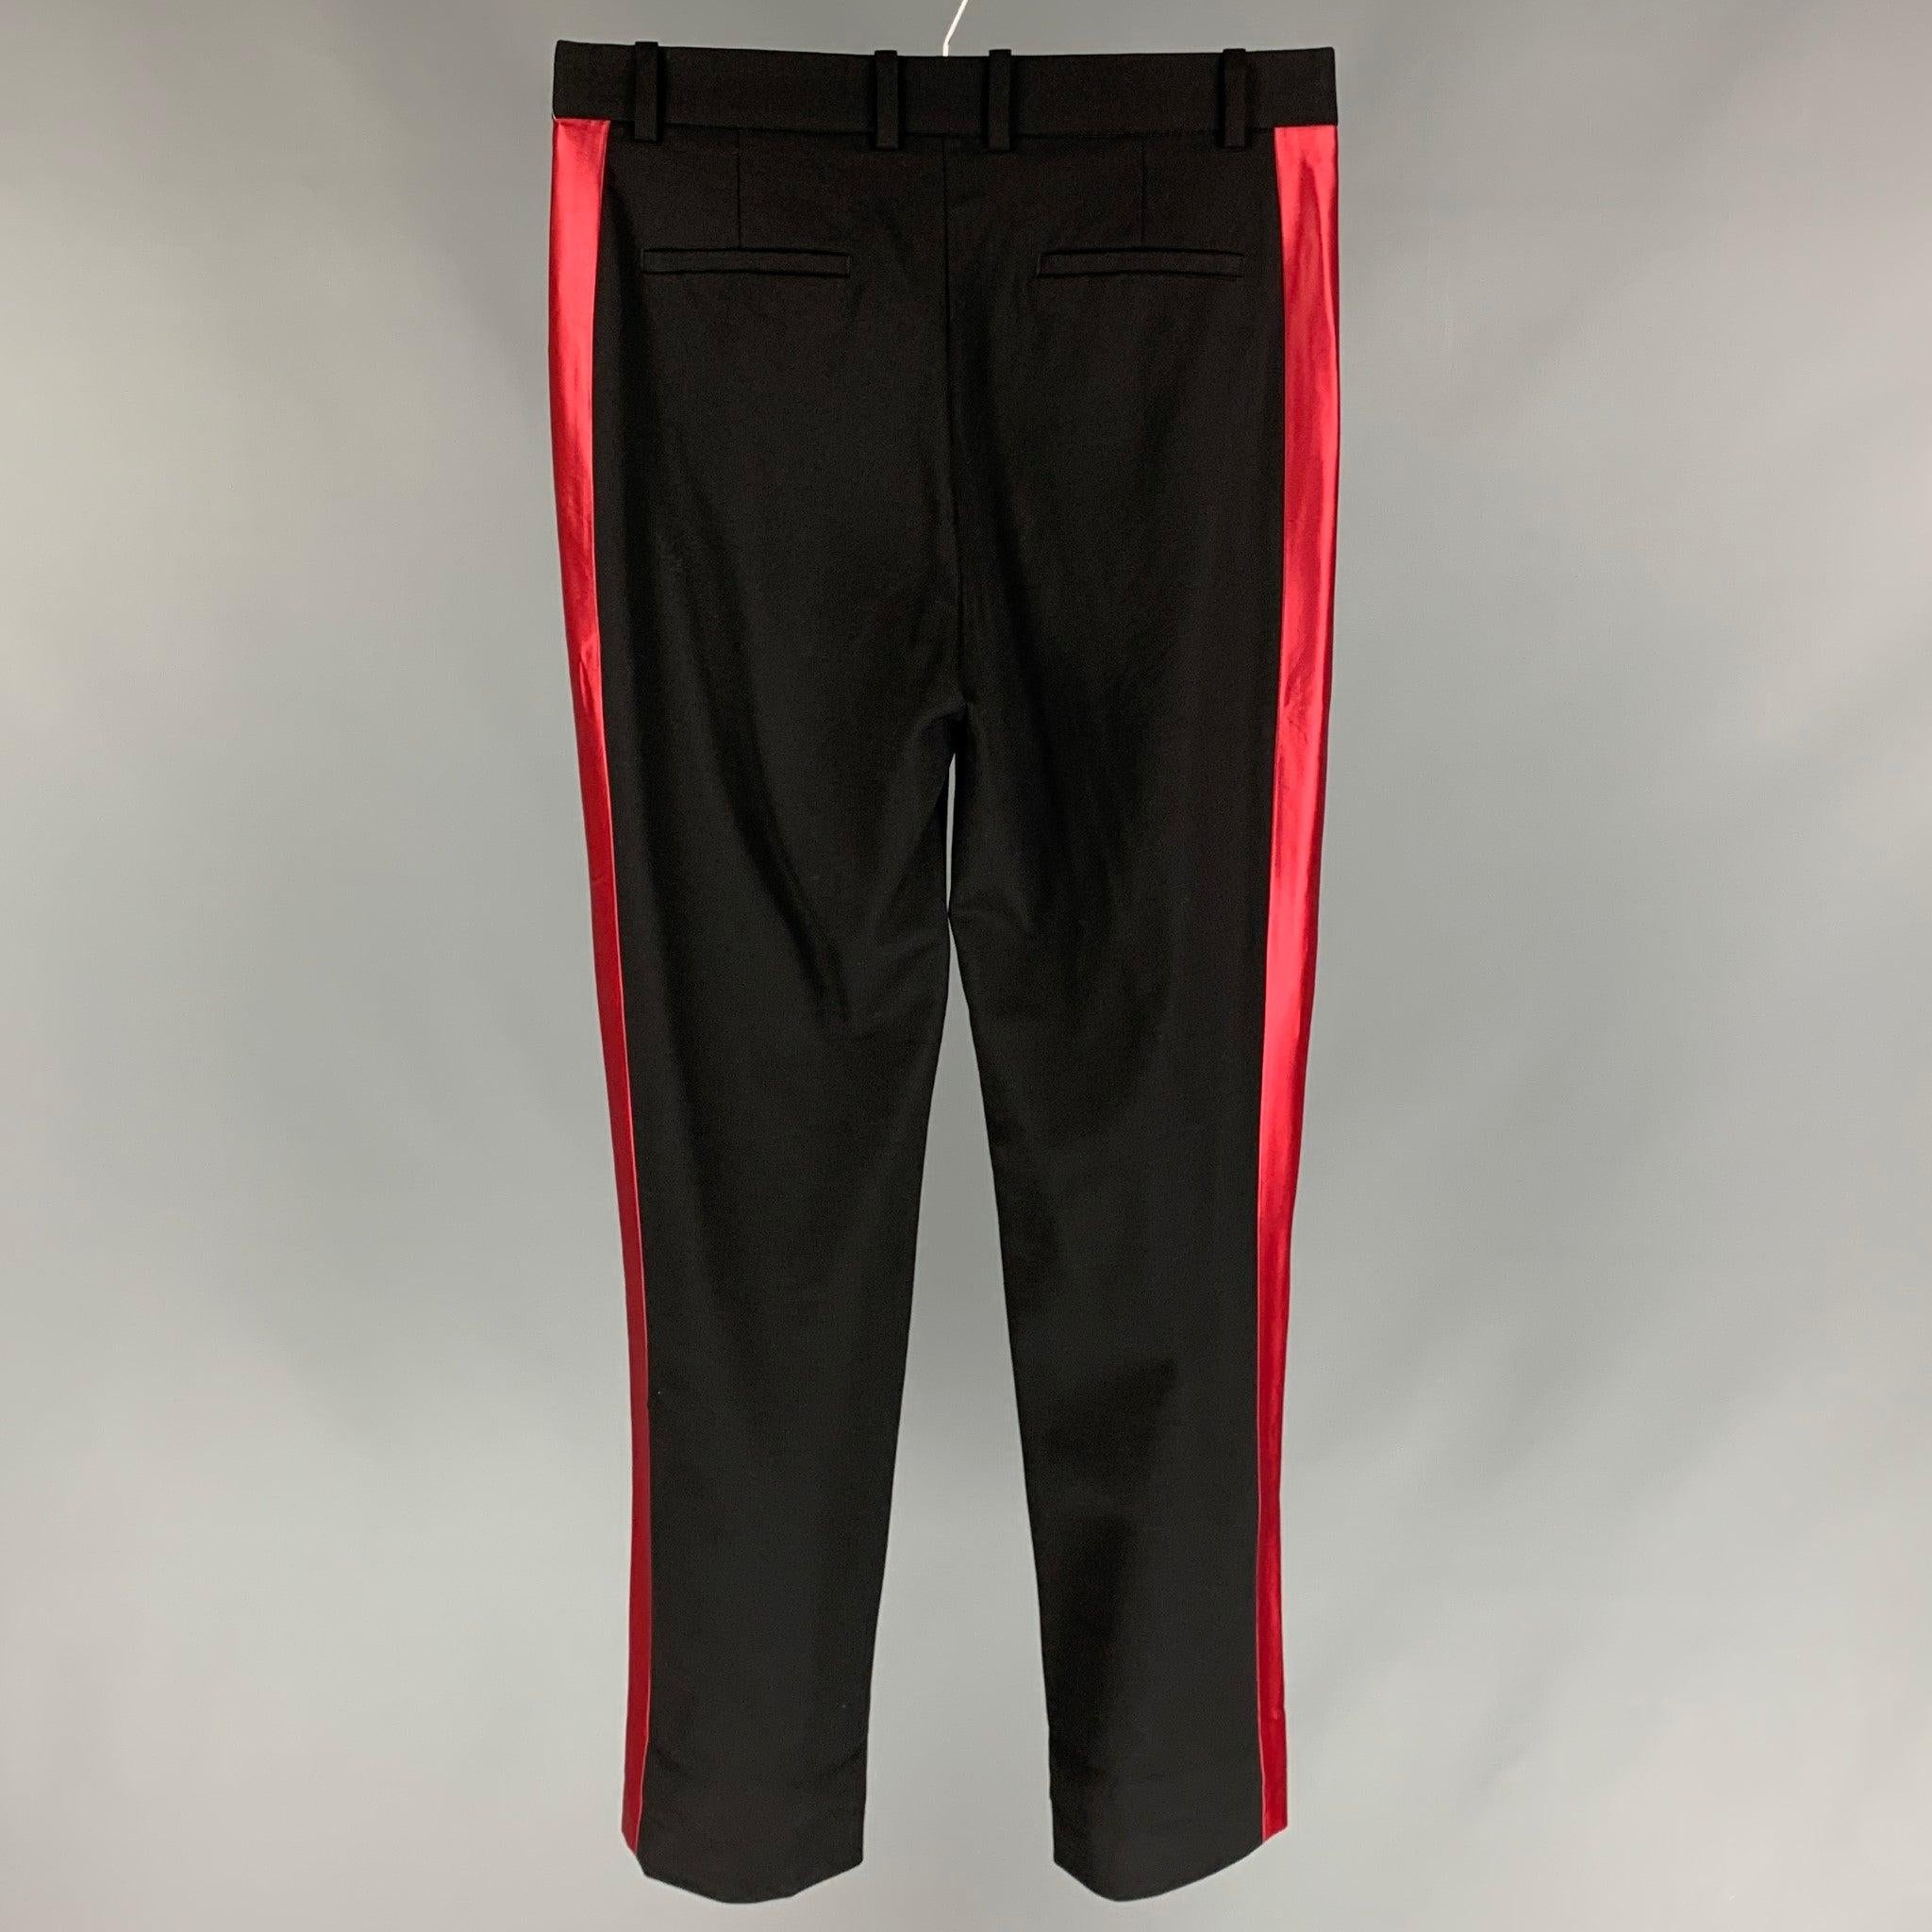 THE KOOPLES Size 31 Black & Red Wool Tuxedo Dress Pants In Good Condition For Sale In San Francisco, CA